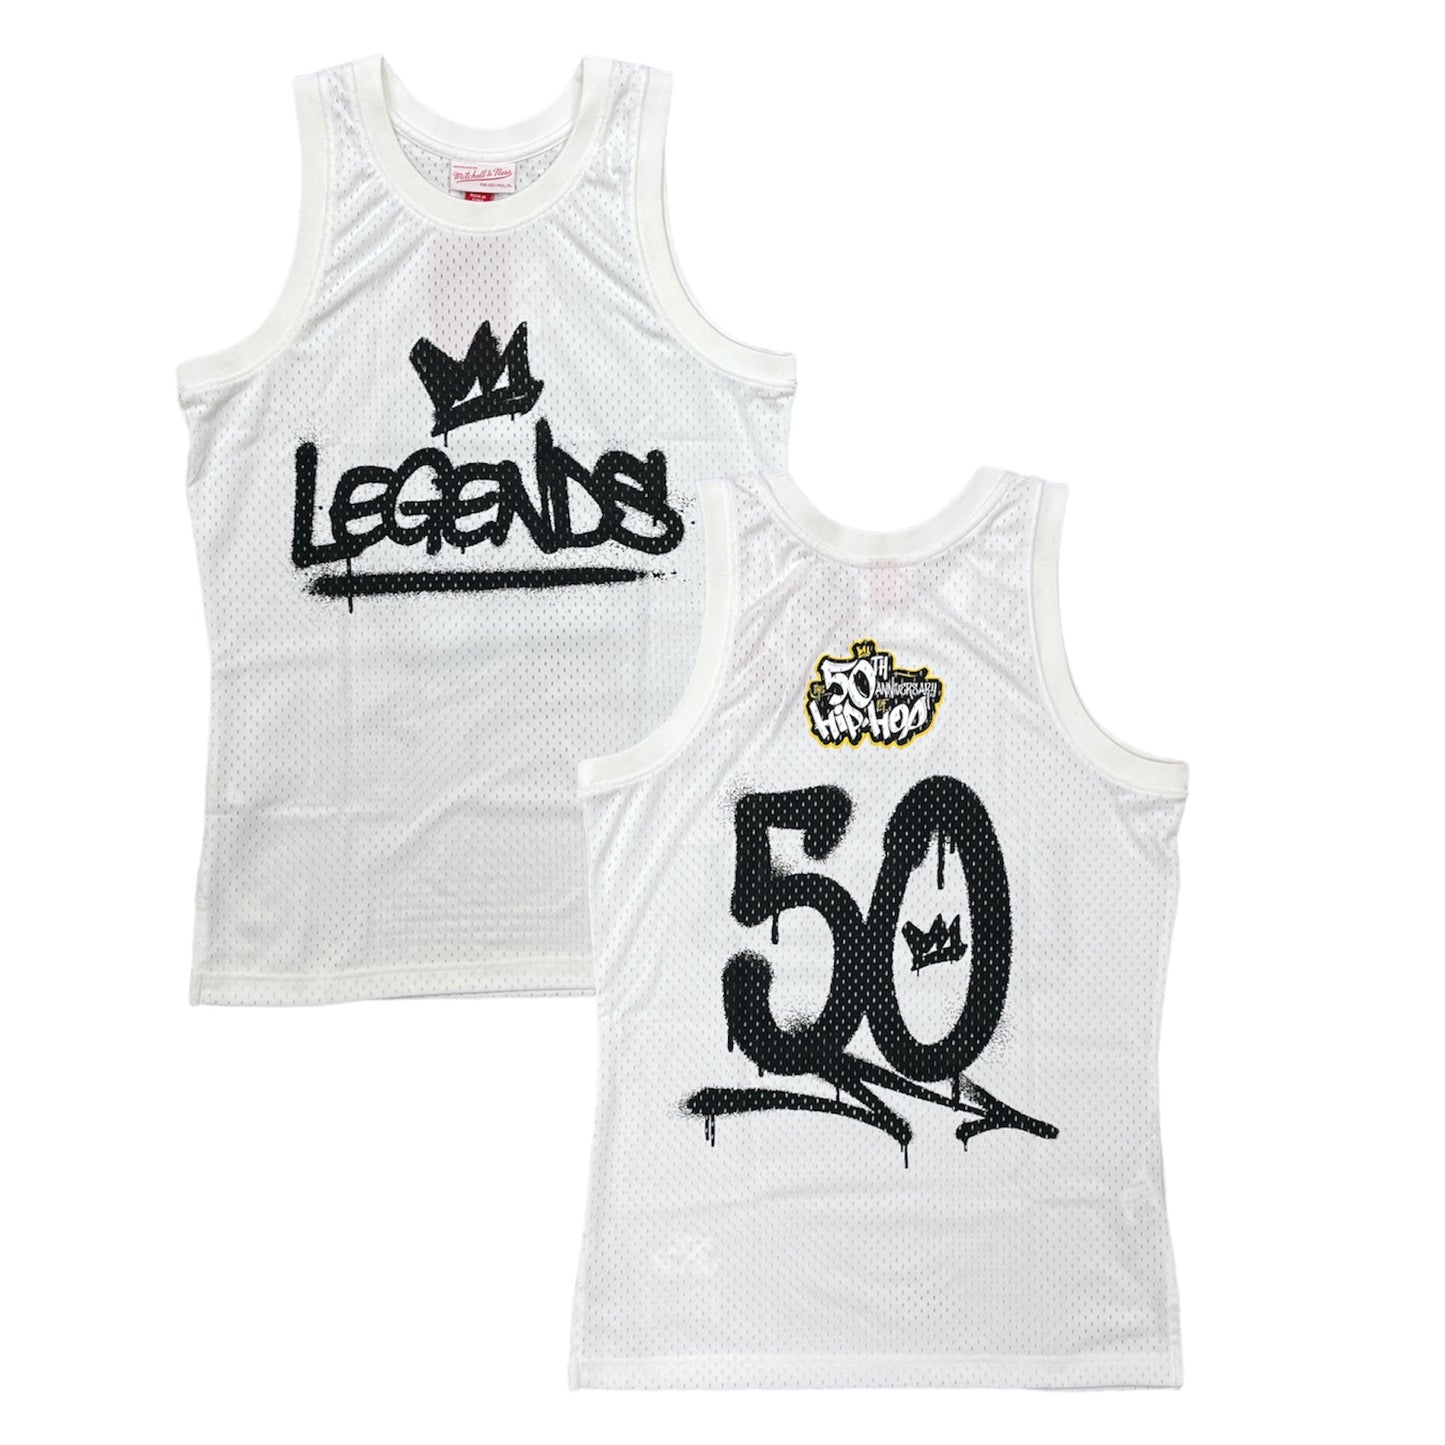 MITCHELL AND NESS - 50TH ANNIVERSARY OF HIP HOP LEGENDS JERSEY